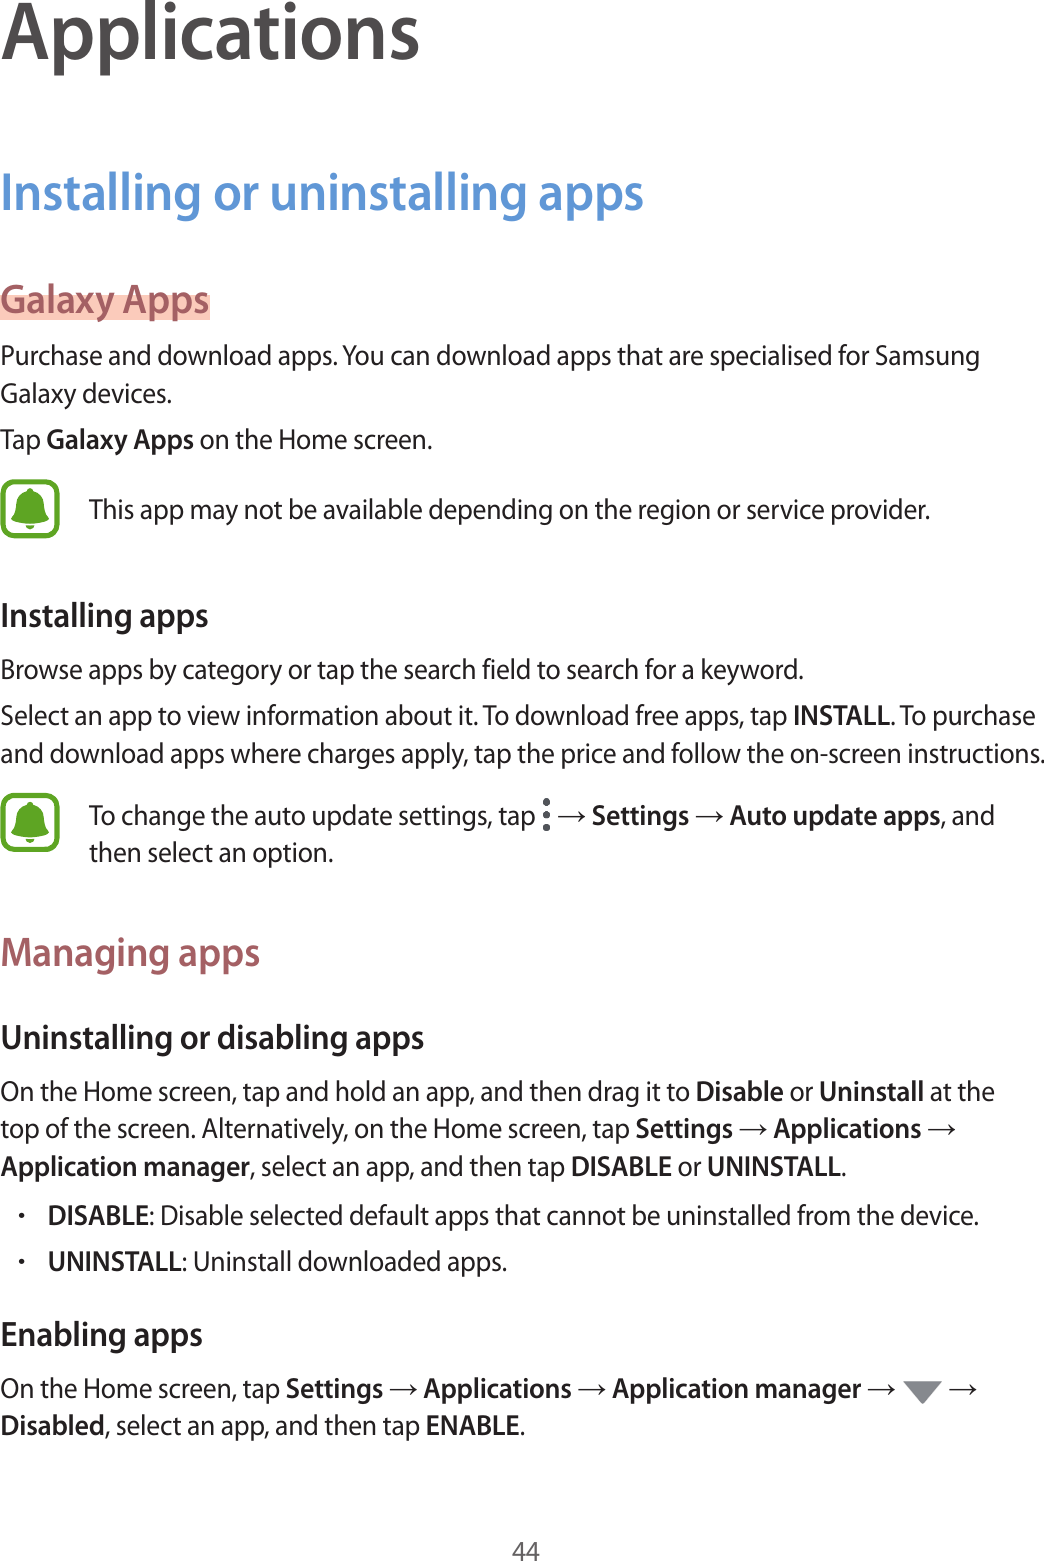 44ApplicationsInstalling or uninstalling appsGalaxy AppsPurchase and download apps. You can download apps that are specialised for Samsung Galaxy devices.Tap Galaxy Apps on the Home screen.This app may not be available depending on the region or service provider.Installing appsBrowse apps by category or tap the search field to search for a keyword.Select an app to view information about it. To download free apps, tap INSTALL. To purchase and download apps where charges apply, tap the price and follow the on-screen instructions.To change the auto update settings, tap   → Settings → Auto update apps, and then select an option.Managing appsUninstalling or disabling appsOn the Home screen, tap and hold an app, and then drag it to Disable or Uninstall at the top of the screen. Alternatively, on the Home screen, tap Settings → Applications → Application manager, select an app, and then tap DISABLE or UNINSTALL.•DISABLE: Disable selected default apps that cannot be uninstalled from the device.•UNINSTALL: Uninstall downloaded apps.Enabling appsOn the Home screen, tap Settings → Applications → Application manager →   → Disabled, select an app, and then tap ENABLE.